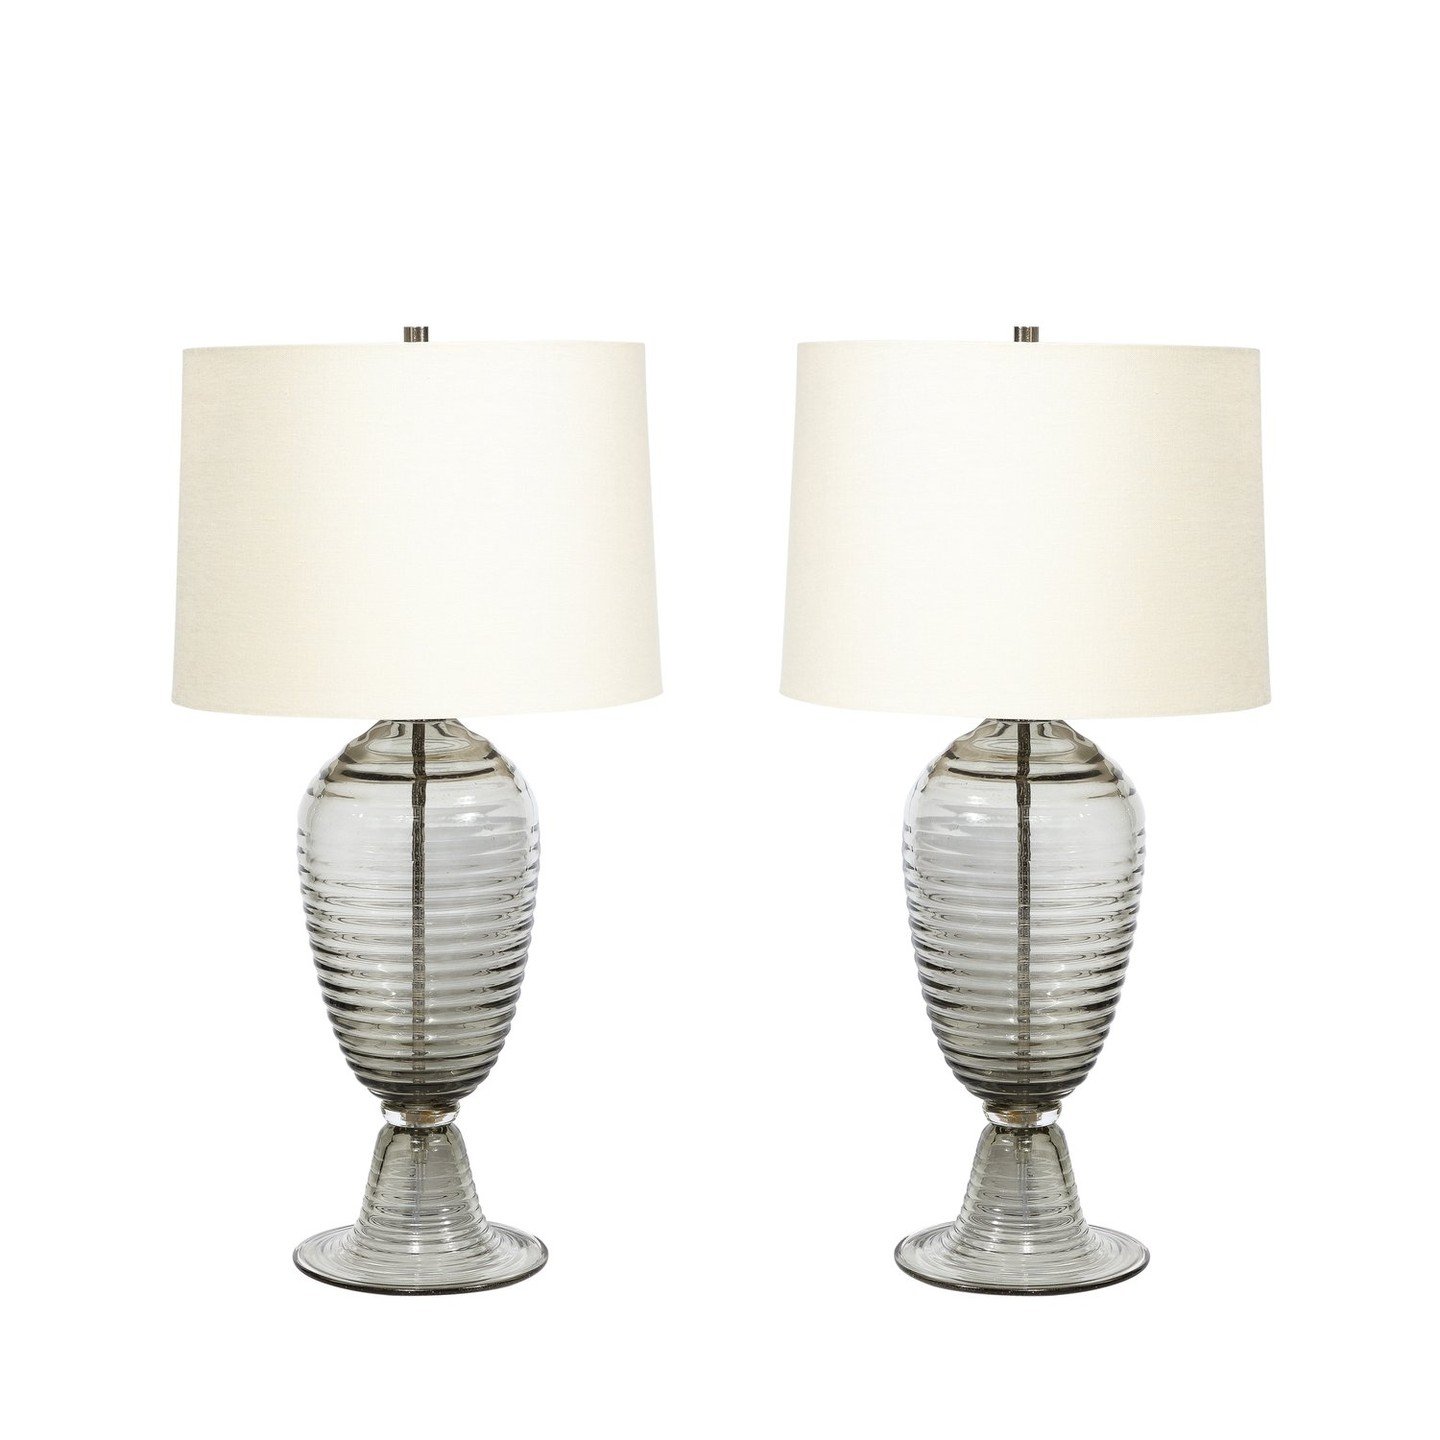 Modernist Art Deco Style Hive Form Hand-Blown Murano Smoked Glass Table Lamps

This pair of Modernist Hive Form Hand-Blown Murano Smoked Glass Table Lamps originates from Italy during the 21st Century. Featuring a beautiful profile with horizontal gr